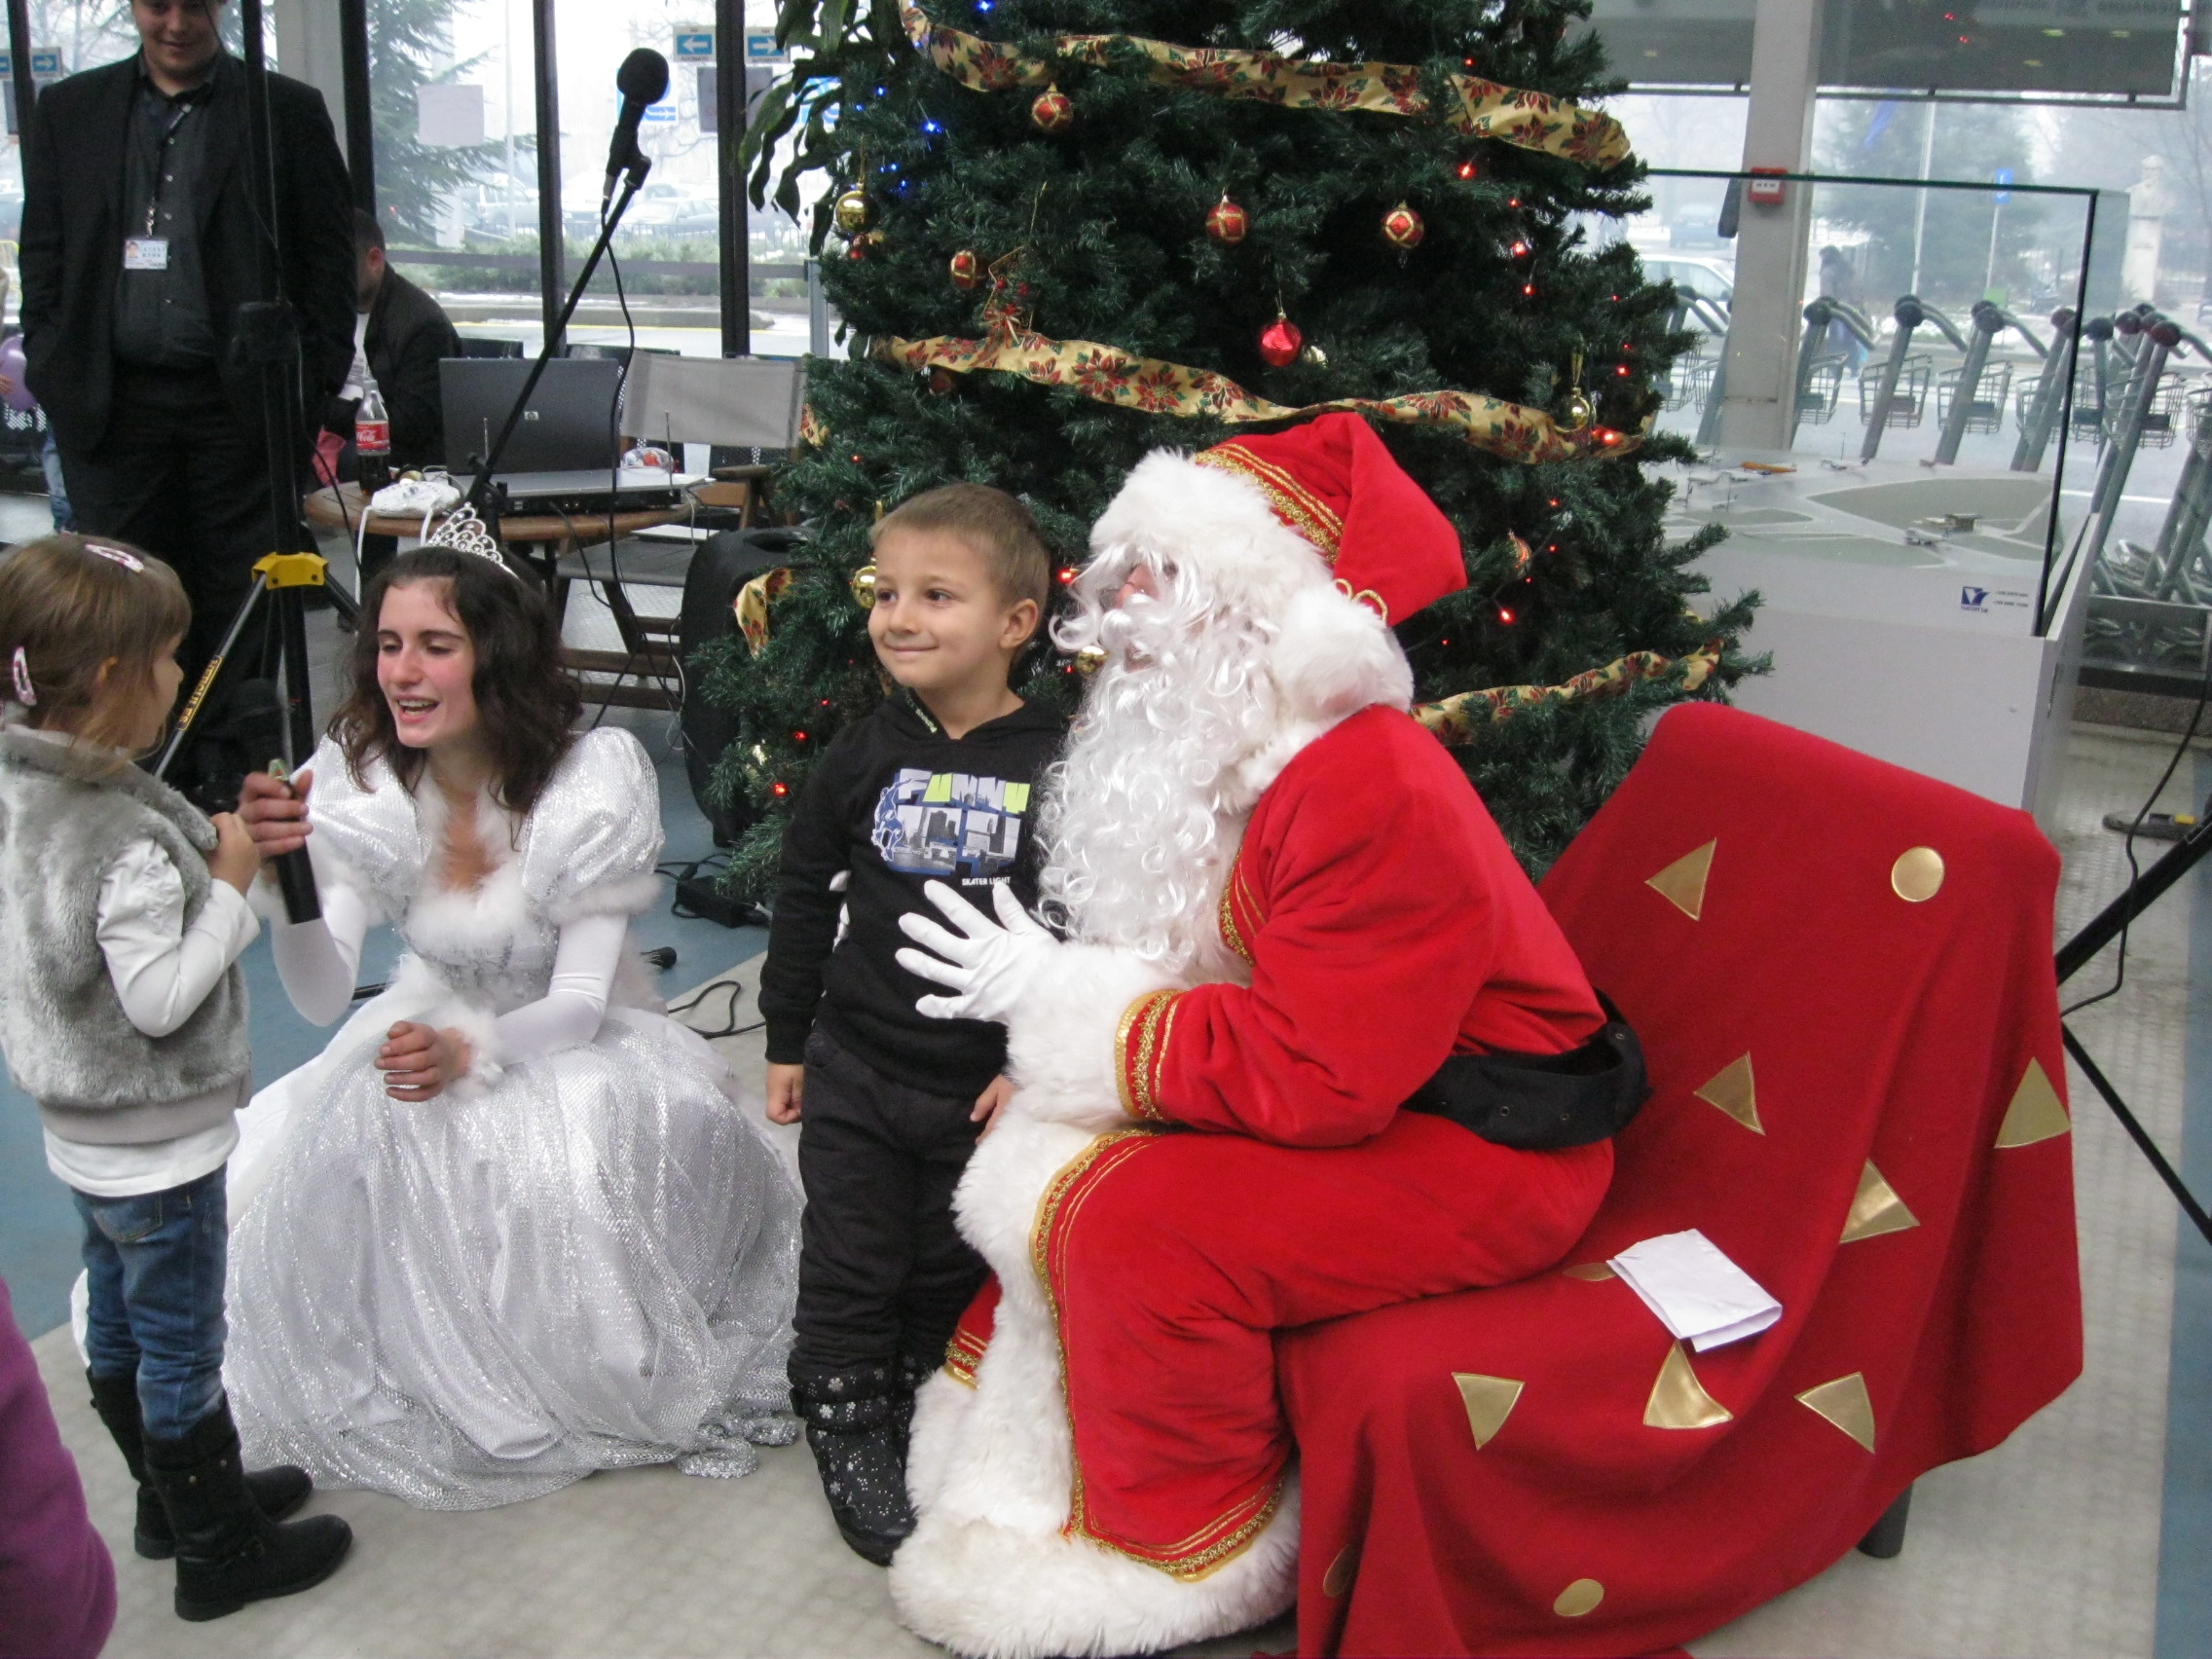 Santa Claus arrived by helicopter at Sofia Airport